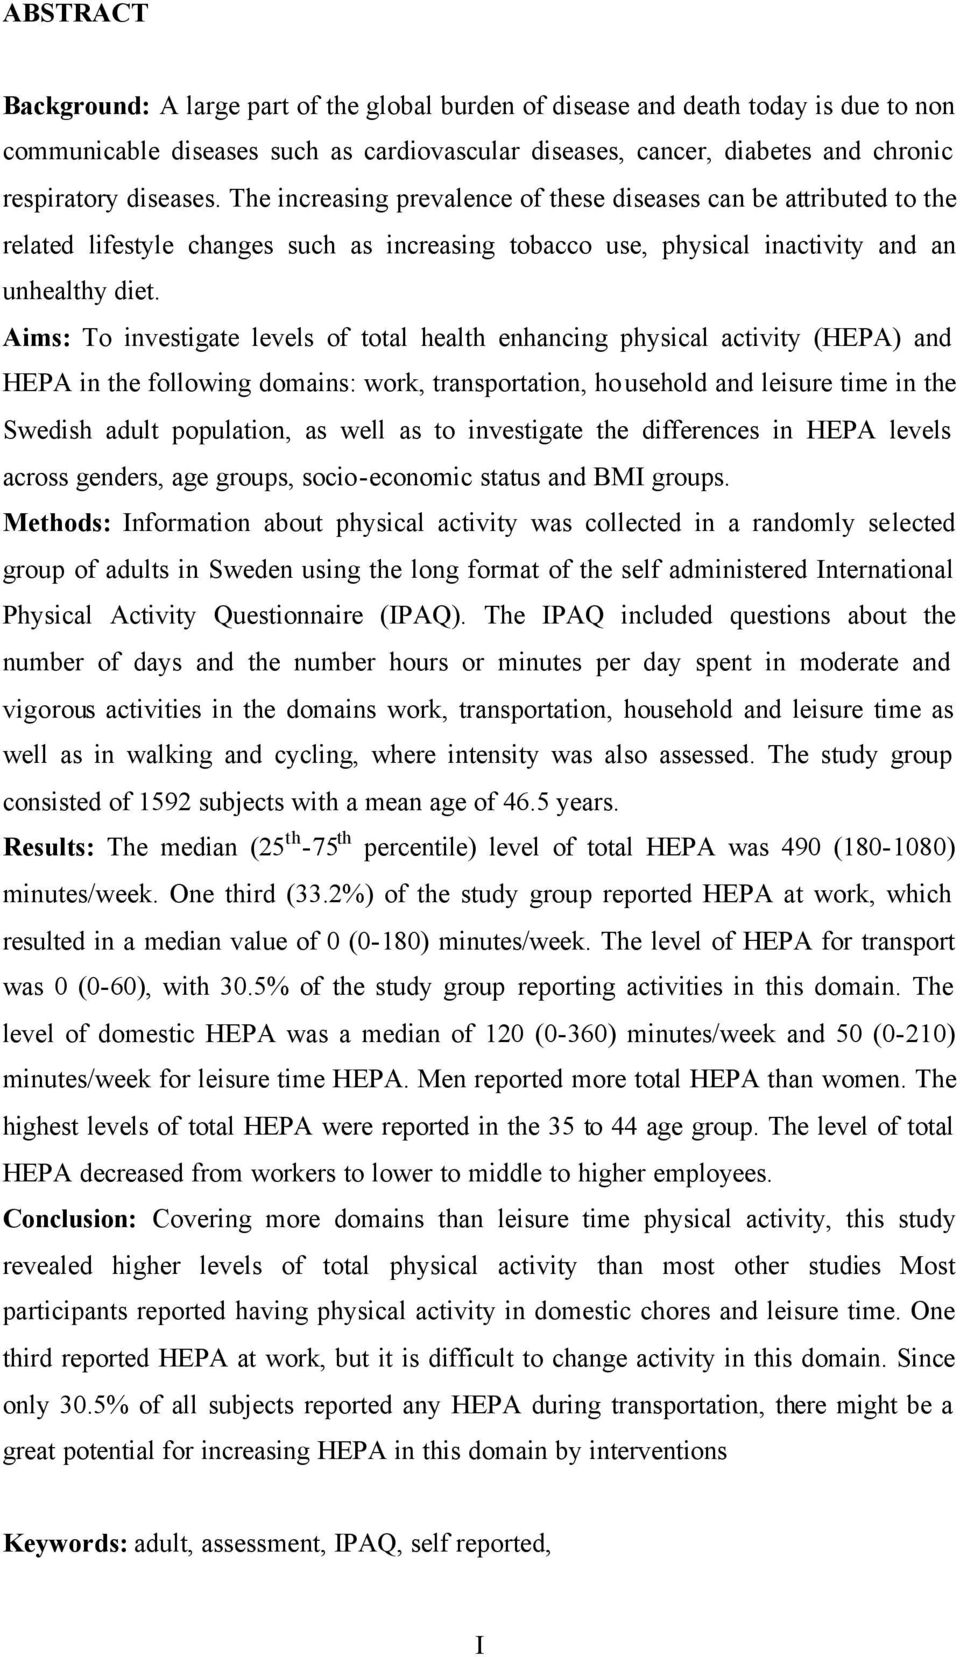 Aims: To investigate levels of total health enhancing physical activity (HEPA) and HEPA in the following domains: work, transportation, household and leisure time in the Swedish adult population, as